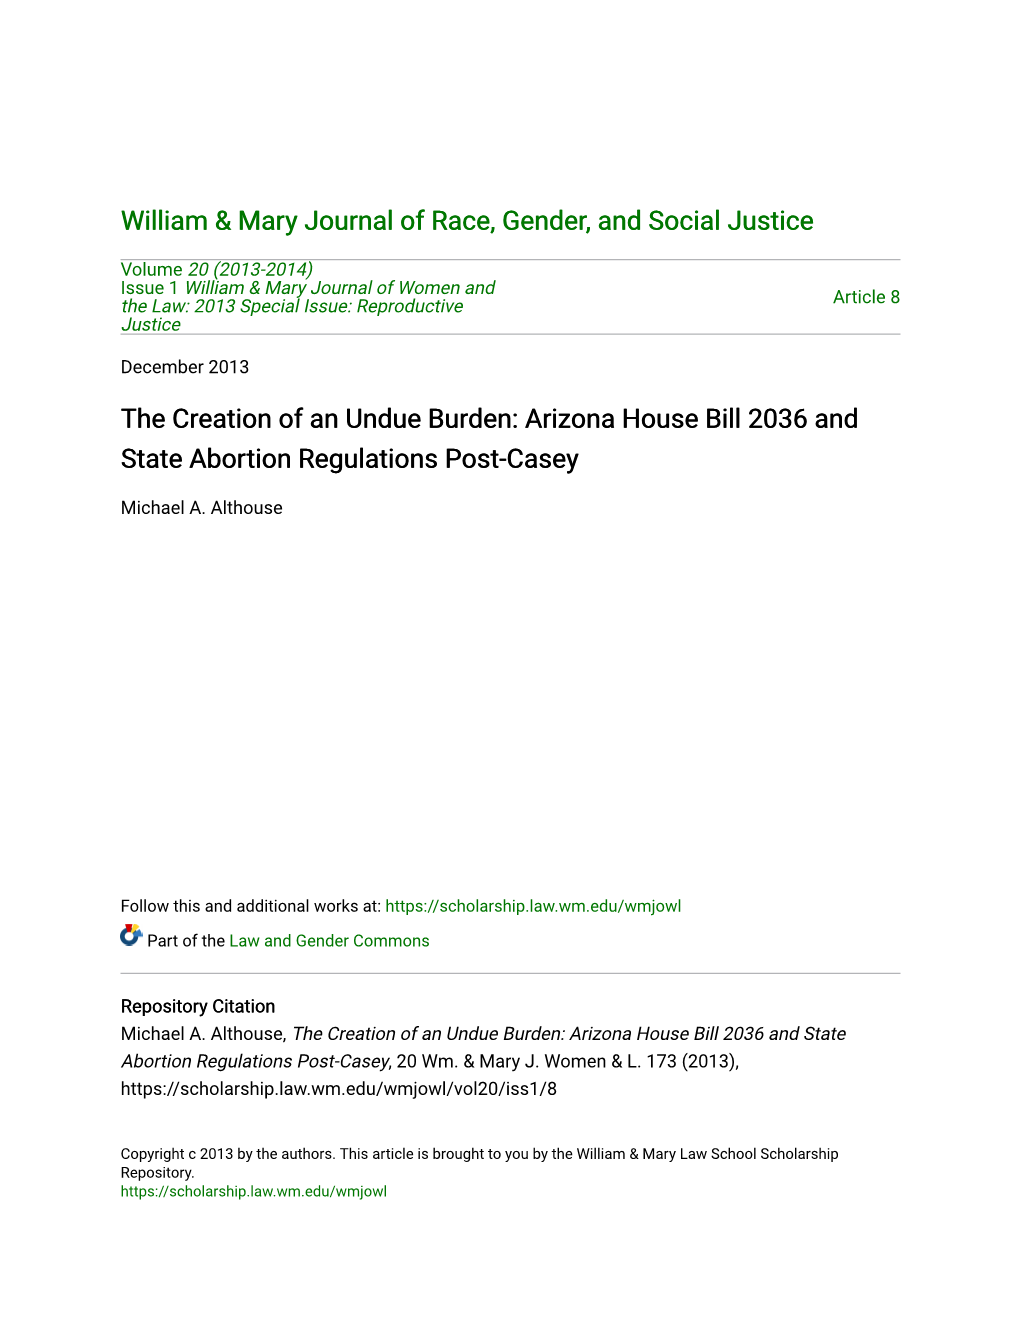 The Creation of an Undue Burden: Arizona House Bill 2036 and State Abortion Regulations Post-Casey